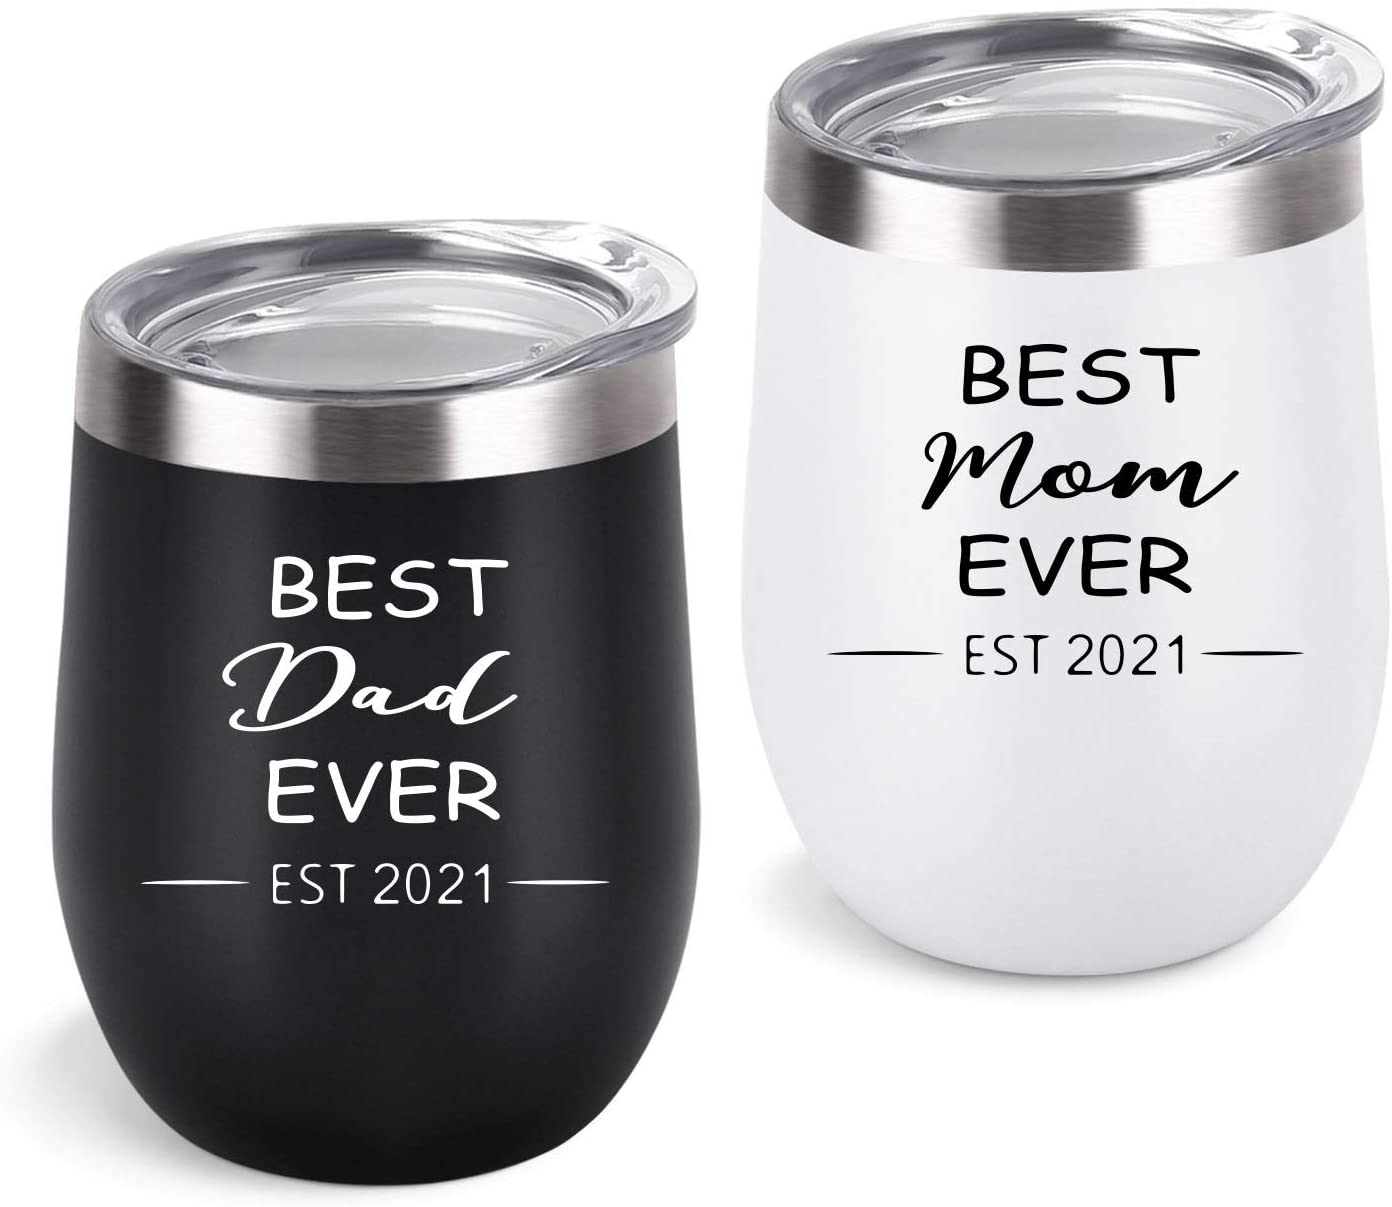 New Parents Gifts, Best Dad and Mom Ever Est 2021 Tumbler Set, New Mom and Dad Parents Baby Shower New Pregnancy Gift, Insulated Stainless Steel Wine Tumbler with Lid Straw(12Oz, Black and White)